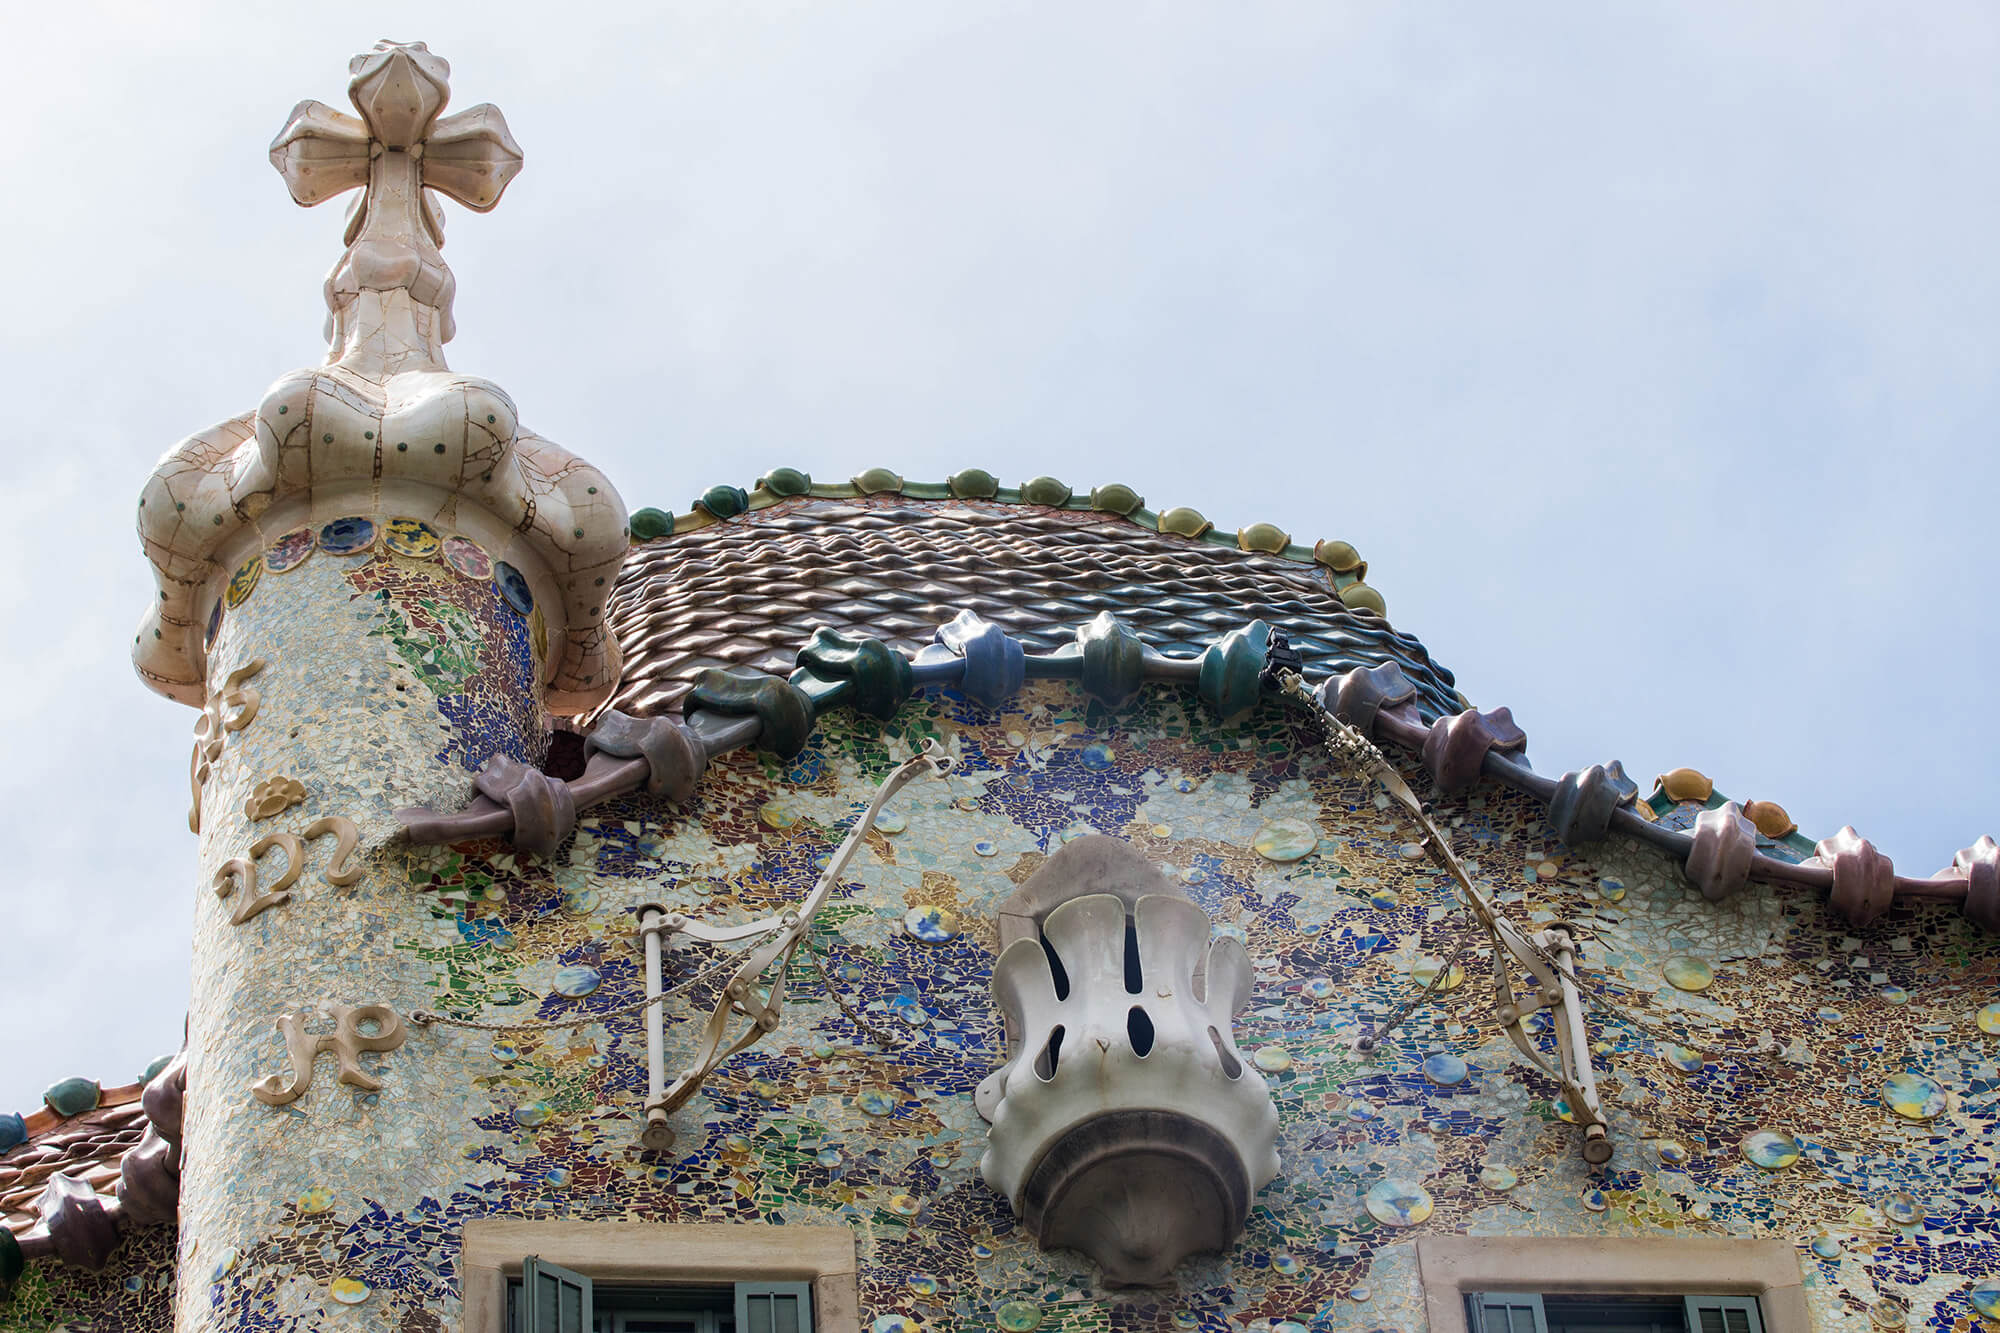 The Peak of One of Gaudi's Mansion Art Pieces in Barcelona, Spain, Europe